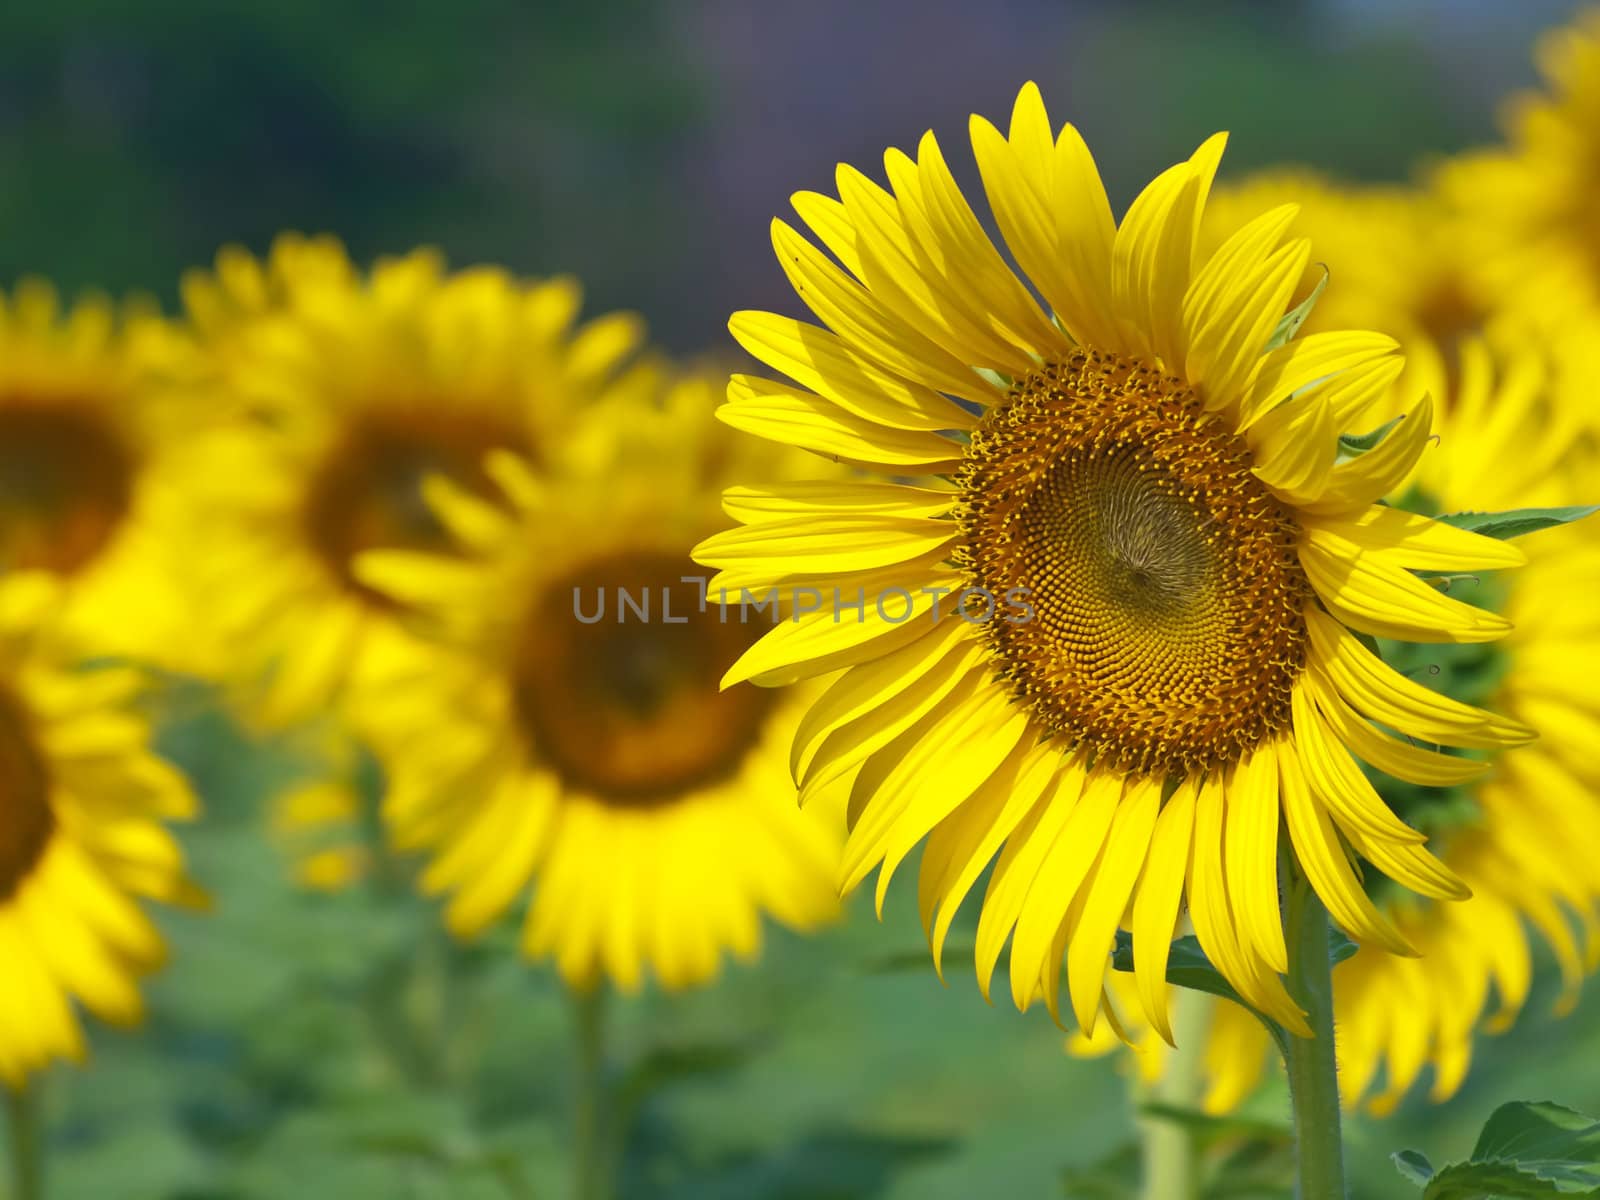 Beautiful sunflower with out of focus background
